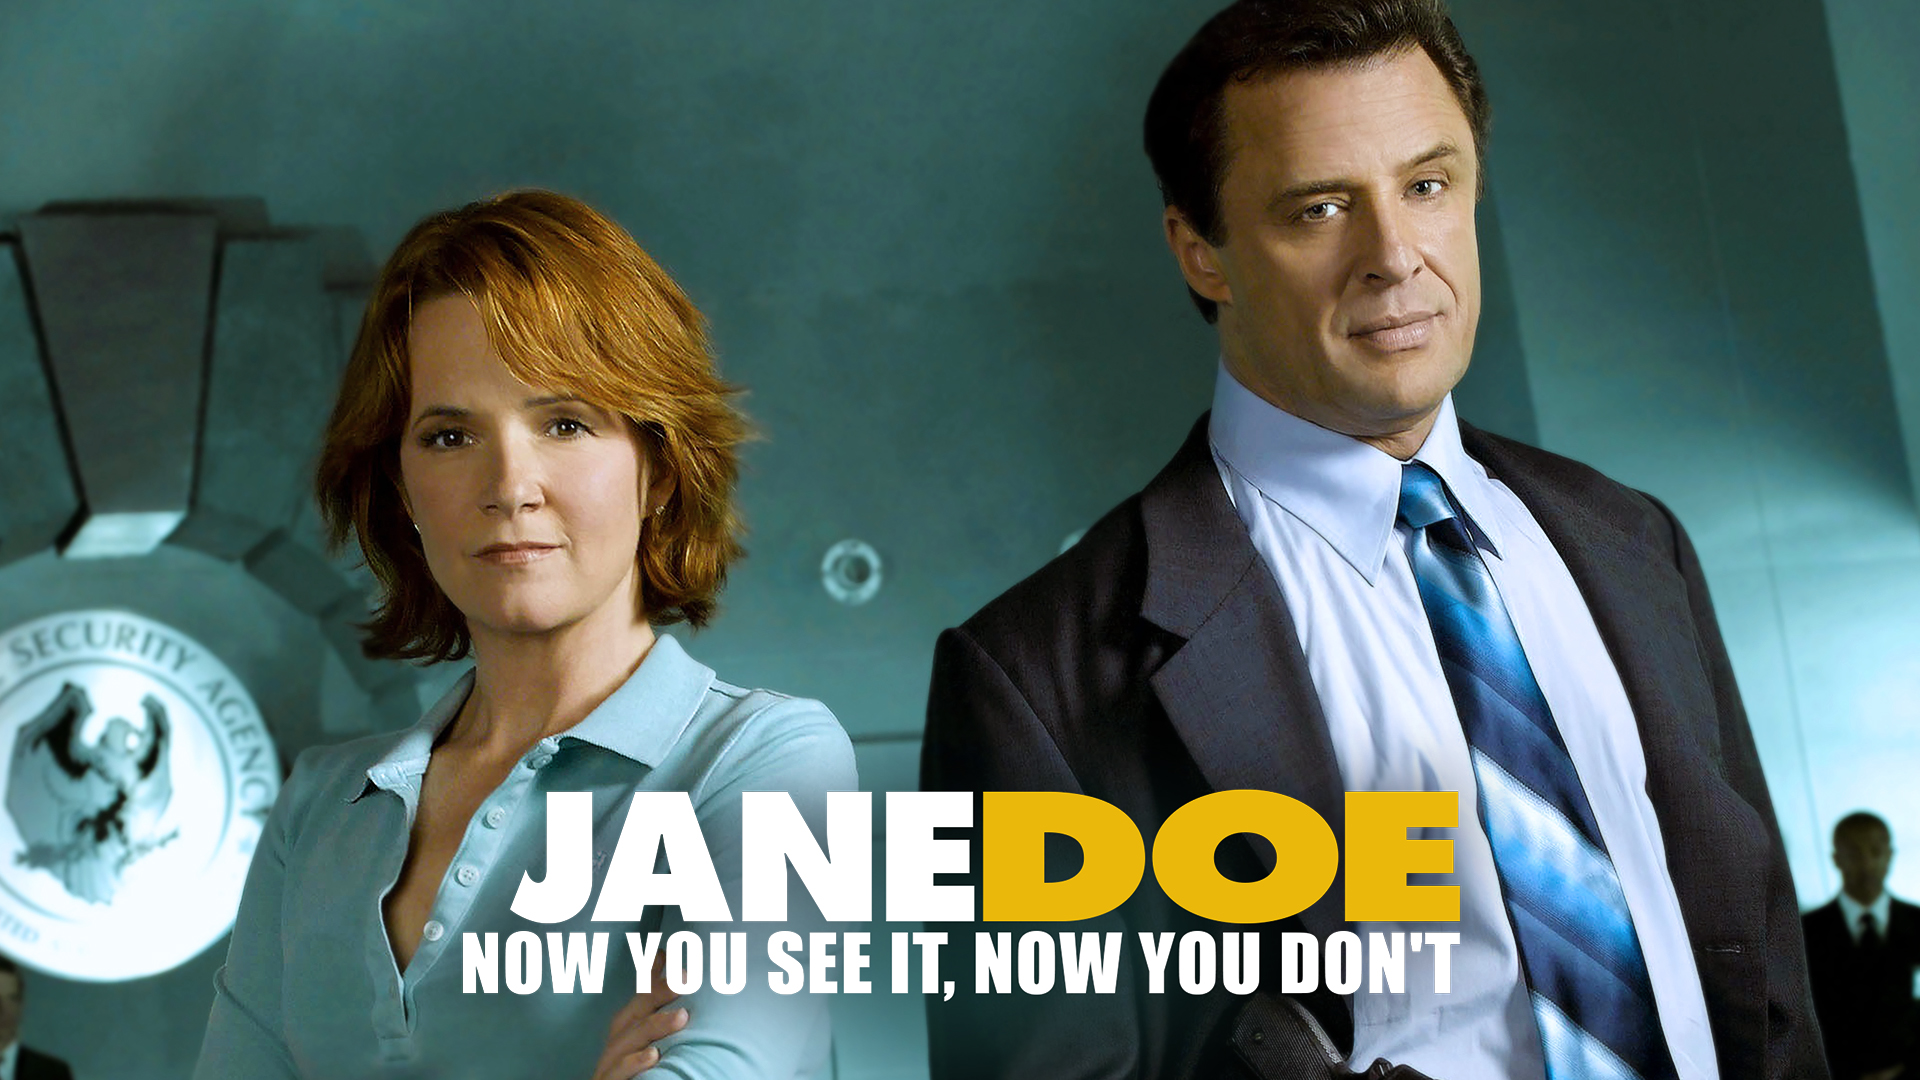 Jane Doe: Now You See It Now You Don't